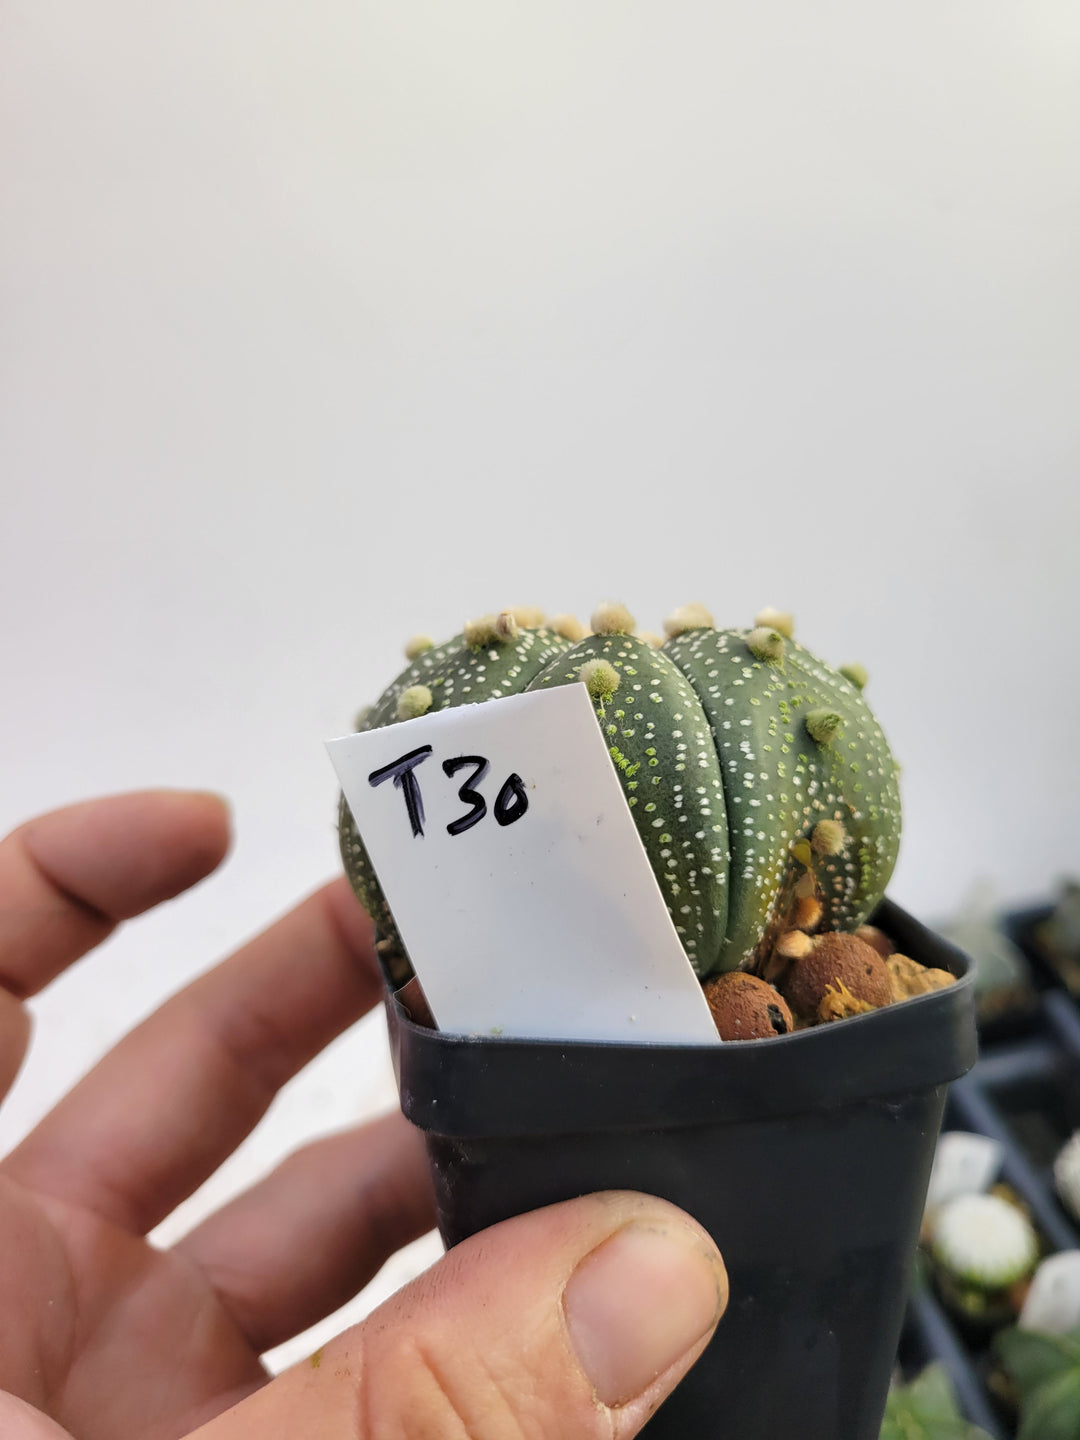 Astrophytum asterias cv. Superkabuto, rooted and established Deaw Cactus- Flowering Seed Grown#T30 - Nice Plants Good Pots